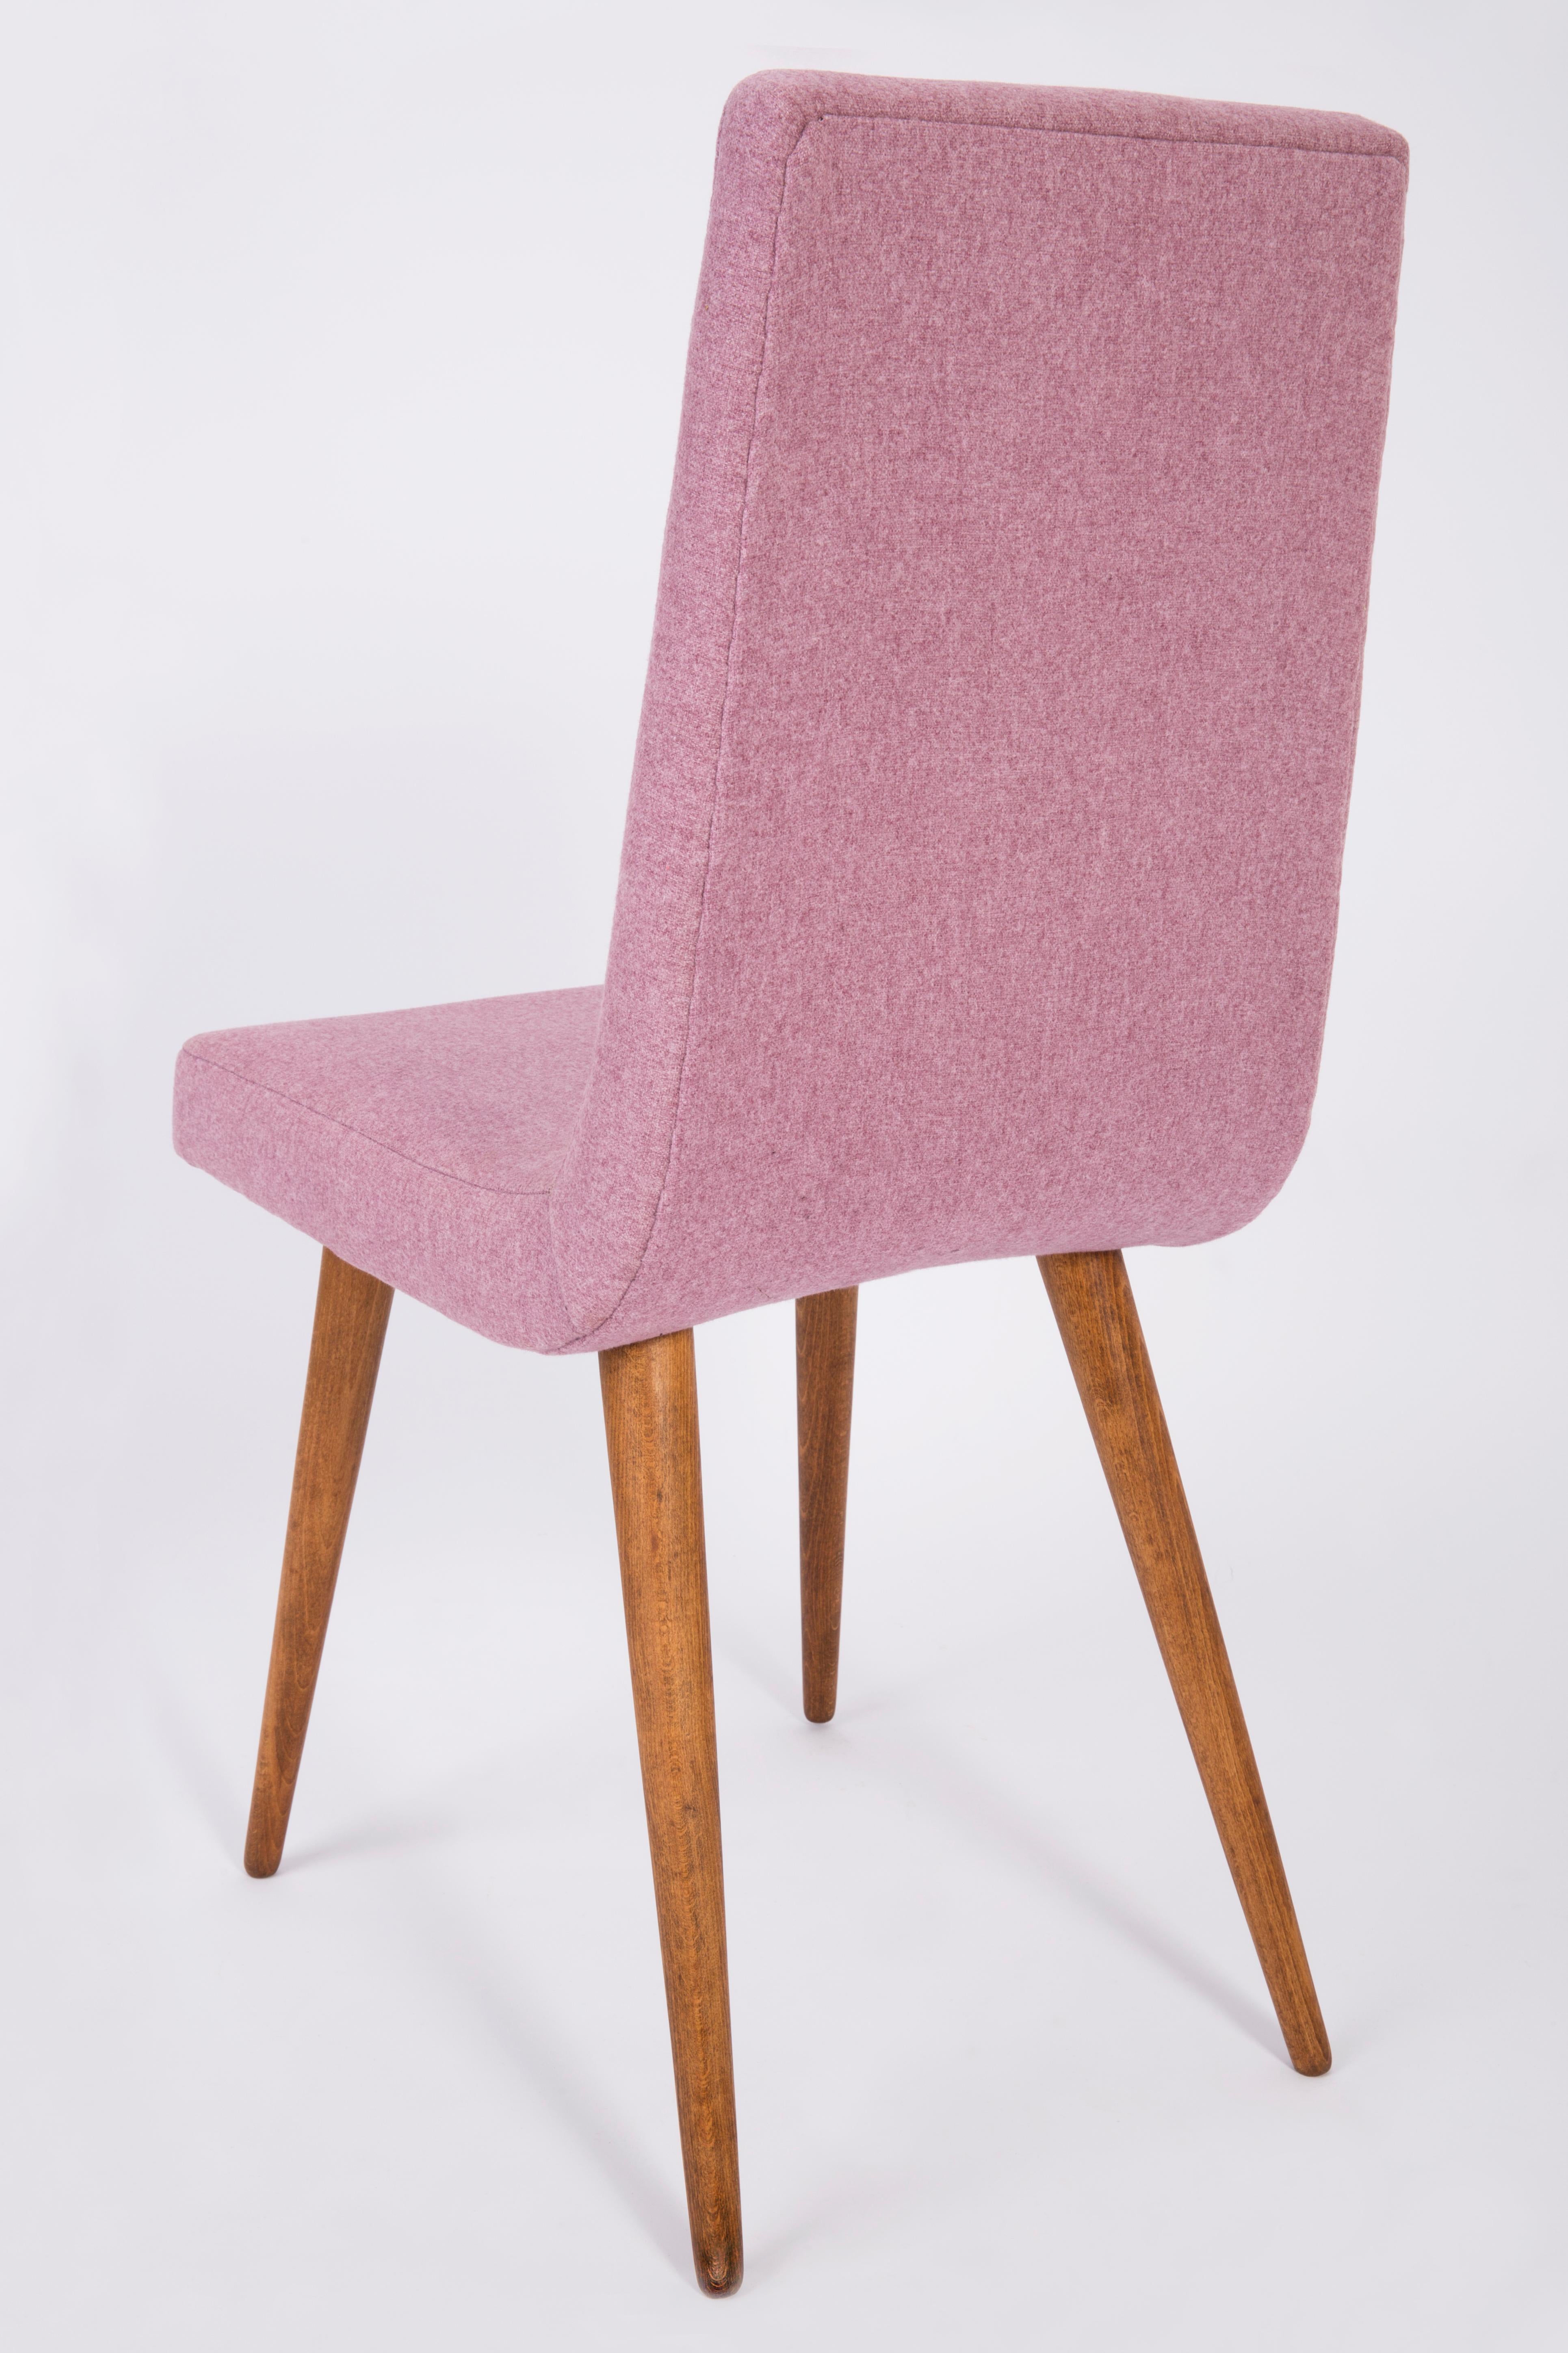 Hand-Crafted Set of Two 20th Century Pink Mélange Rajmund Halas Chairs, 1960s For Sale